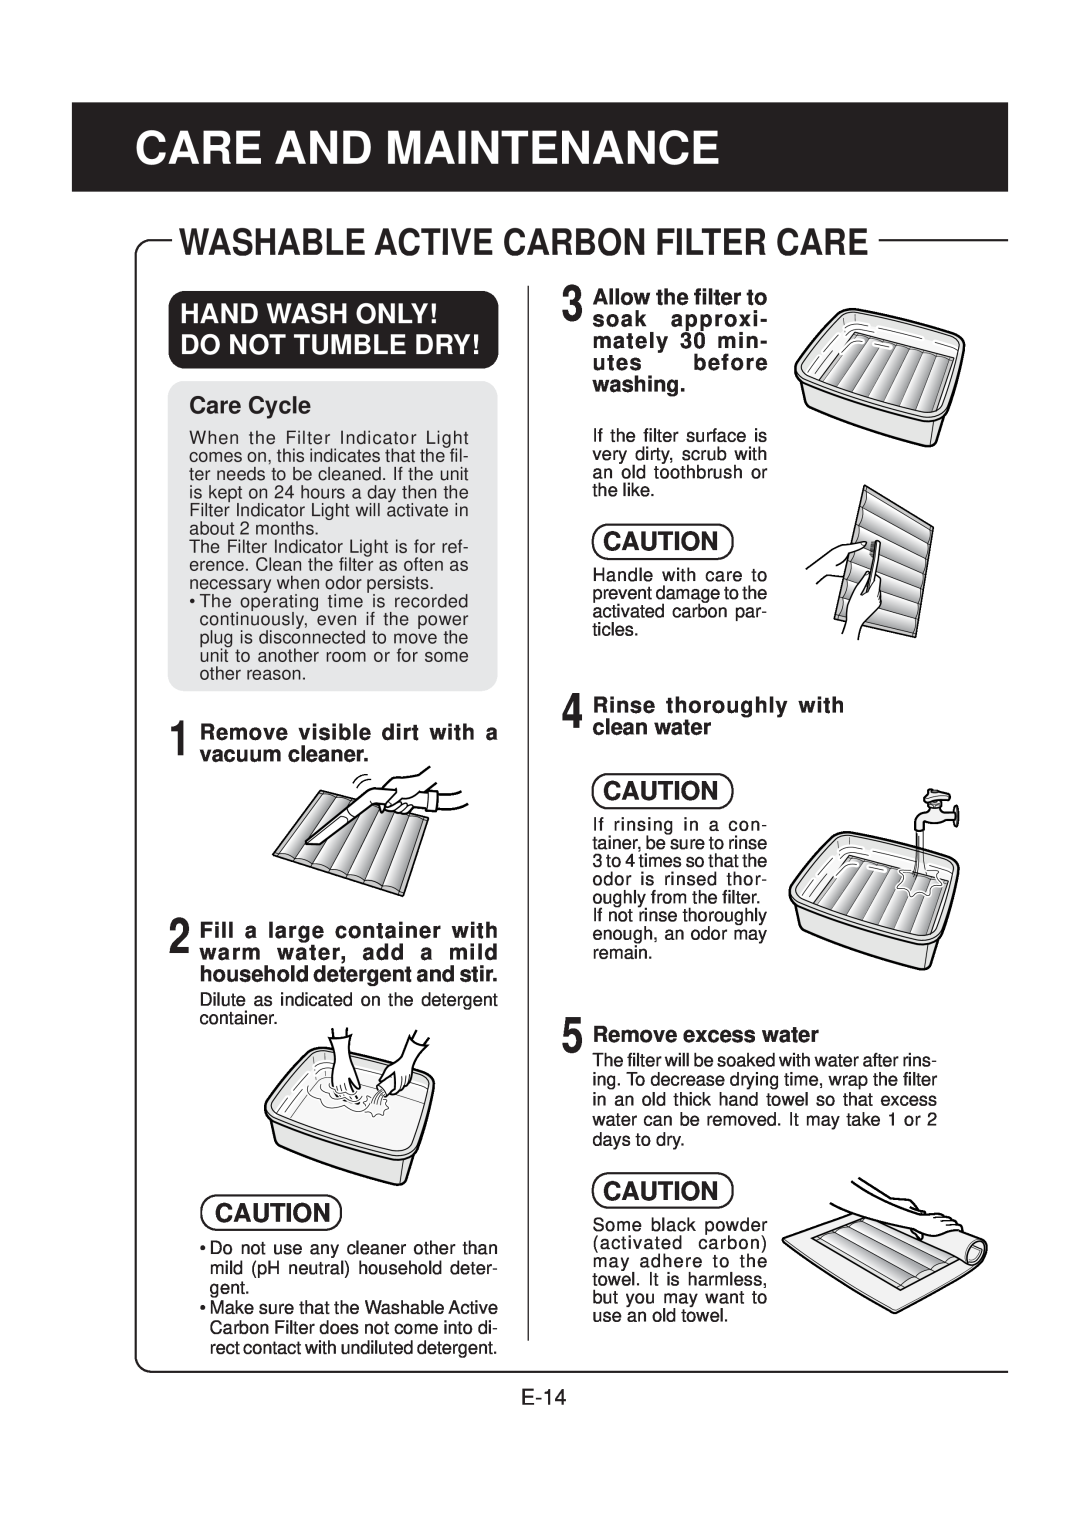 Sharp FP-N40CX Care And Maintenance, Washable Active Carbon Filter Care, Hand Wash Only! Do Not Tumble Dry, E-14 